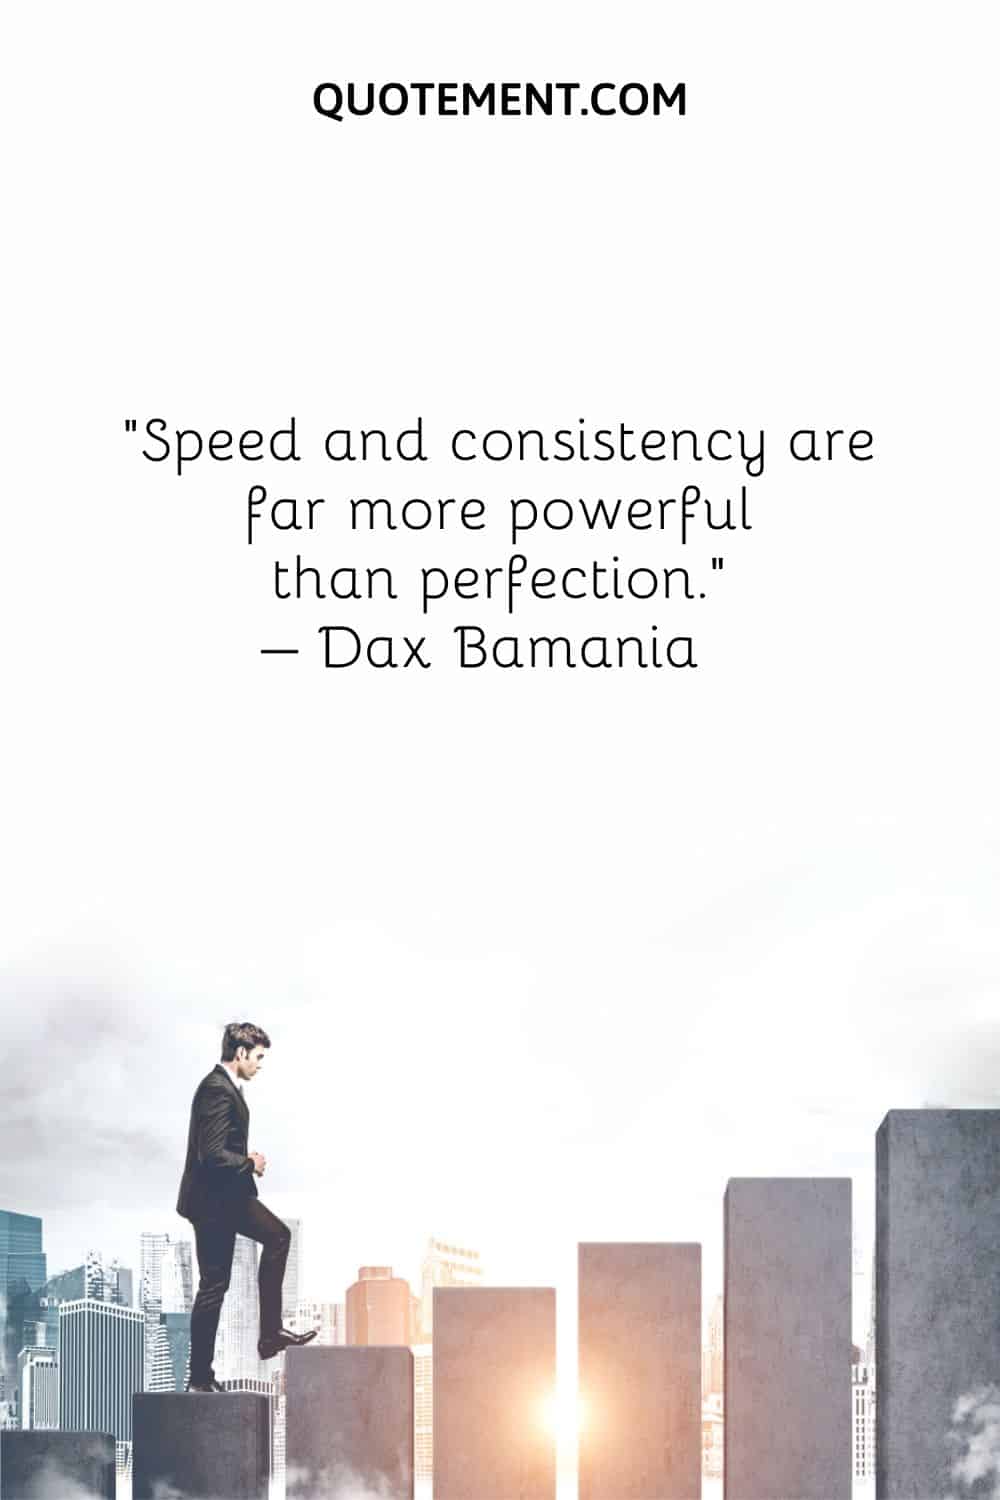 Speed and consistency are far more powerful than perfection.